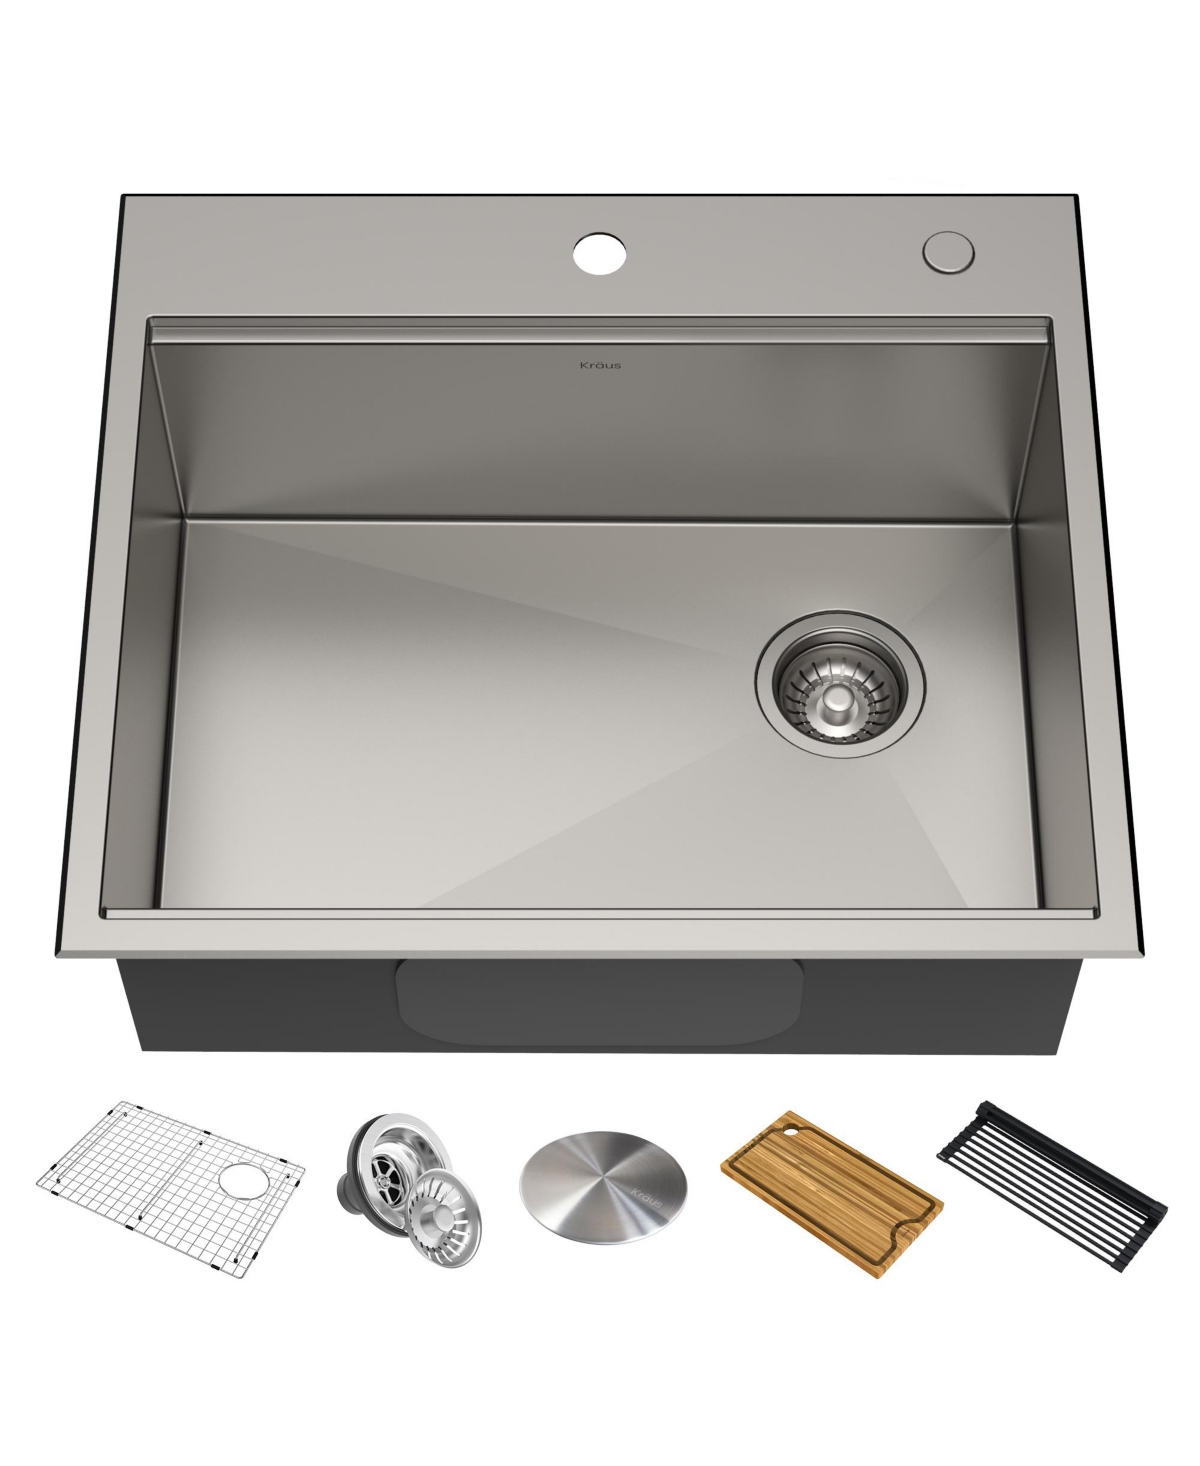 Kore 25 in. Workstation Drop-In 16 Gauge Single Bowl Stainless Steel Kitchen Sink with Accessories - Stainless steel